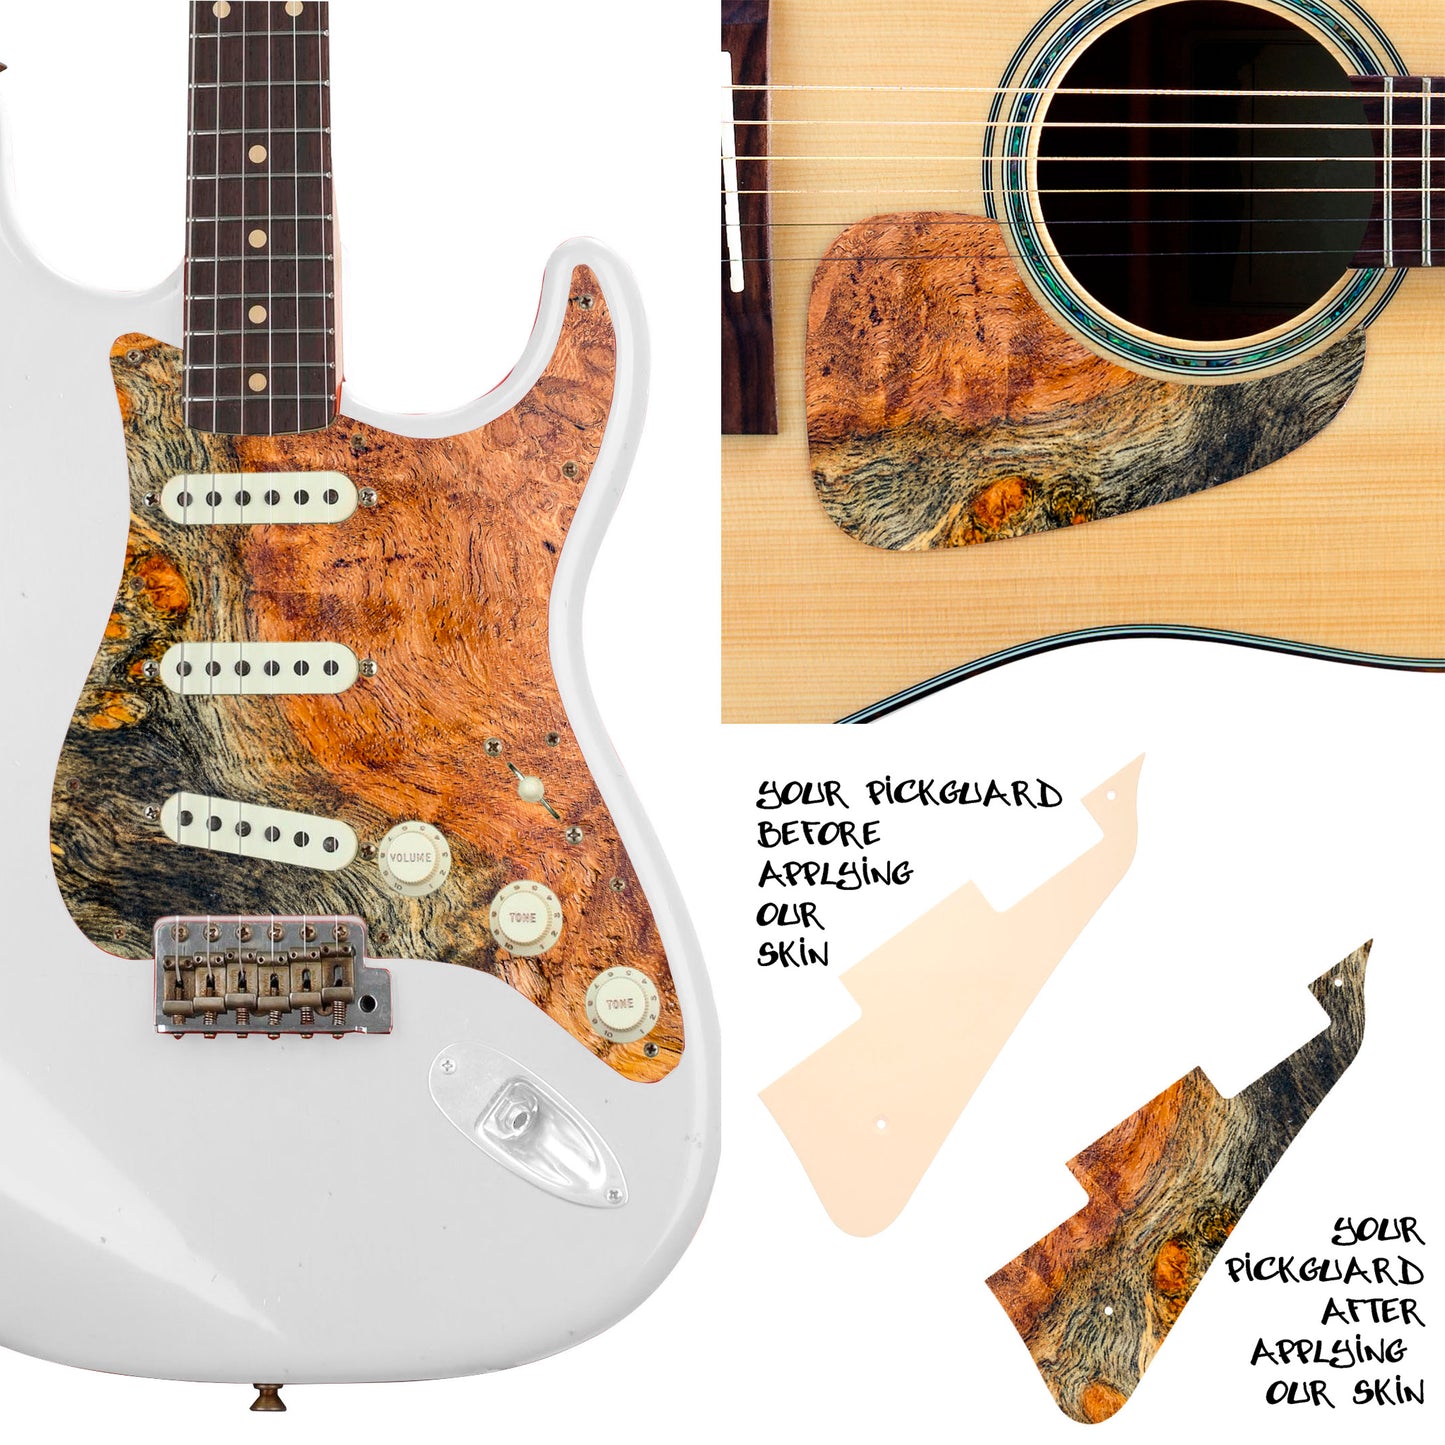 Guitar Custom PickGuard Sticker Skins. Customise your own existing Pickguard, Headstock, Tremolo Cover plate. The Wood Grain PK19